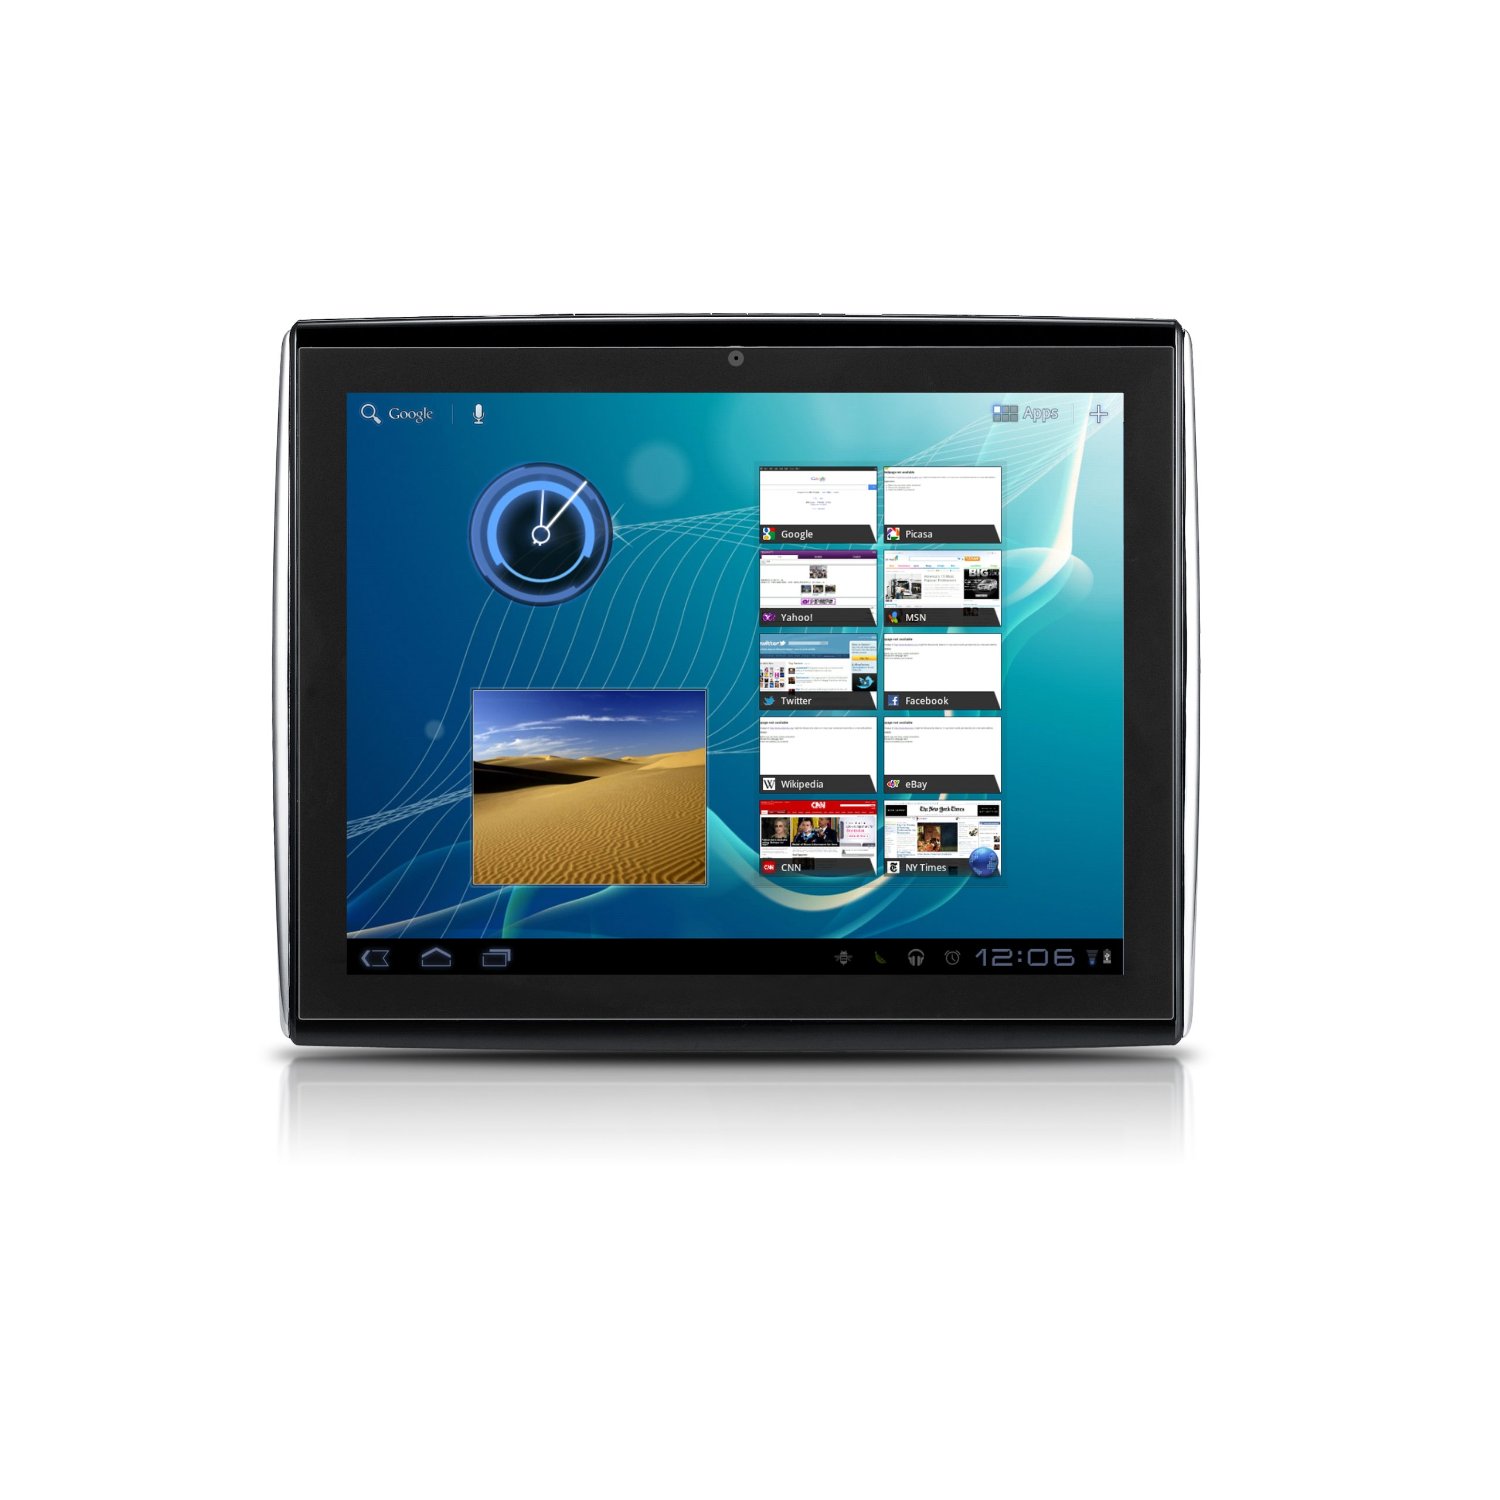 http://thetechjournal.com/wp-content/uploads/images/1210/1350296570-le-pan-ii--a-sturdy-97inch-android-tablet-pc-1.jpg